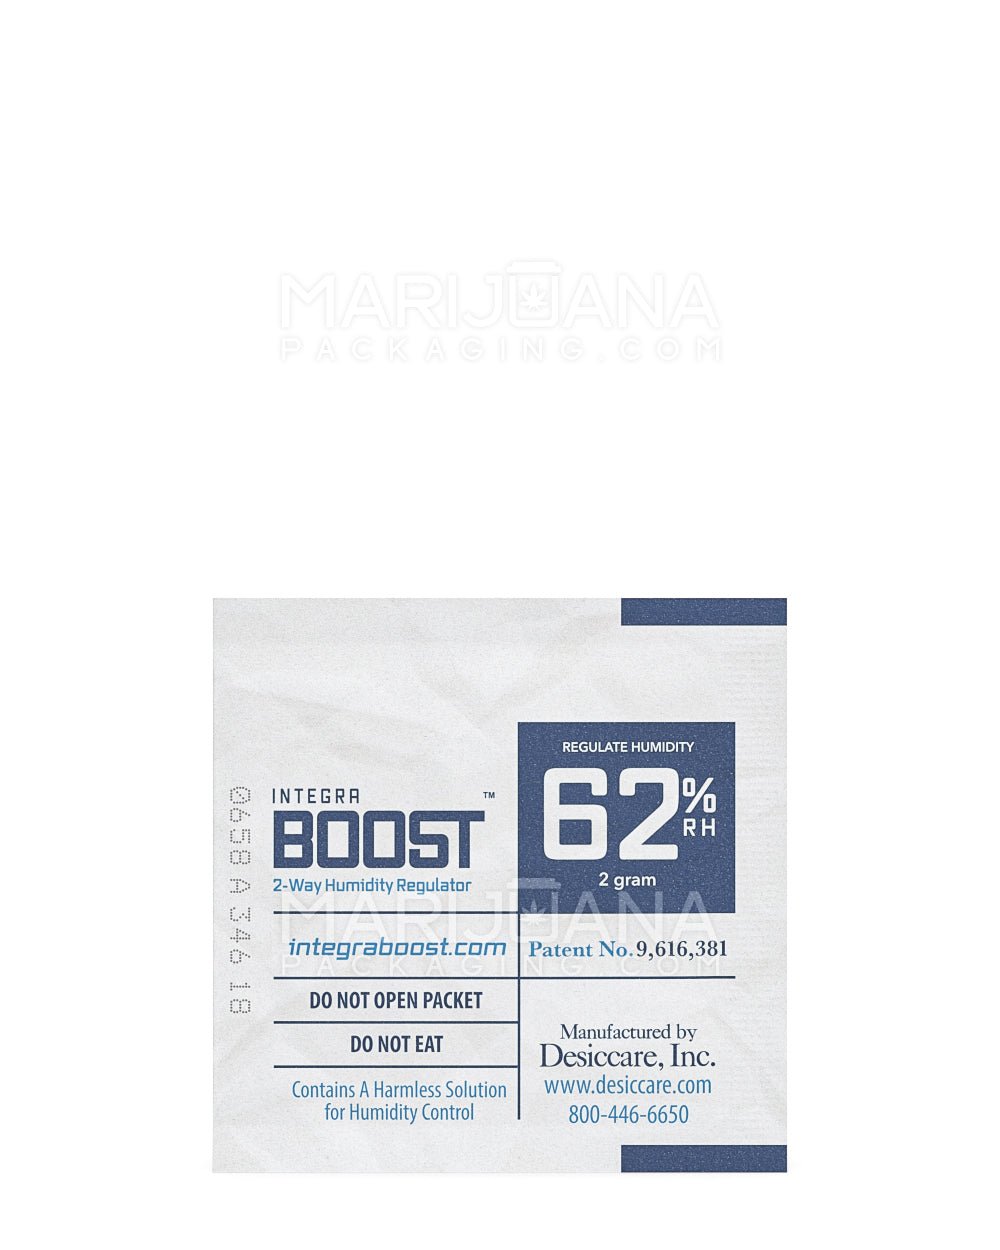 INTEGRA | Boost Humidity Control Packs | 2 Grams - 62% - 2000 Count - 3